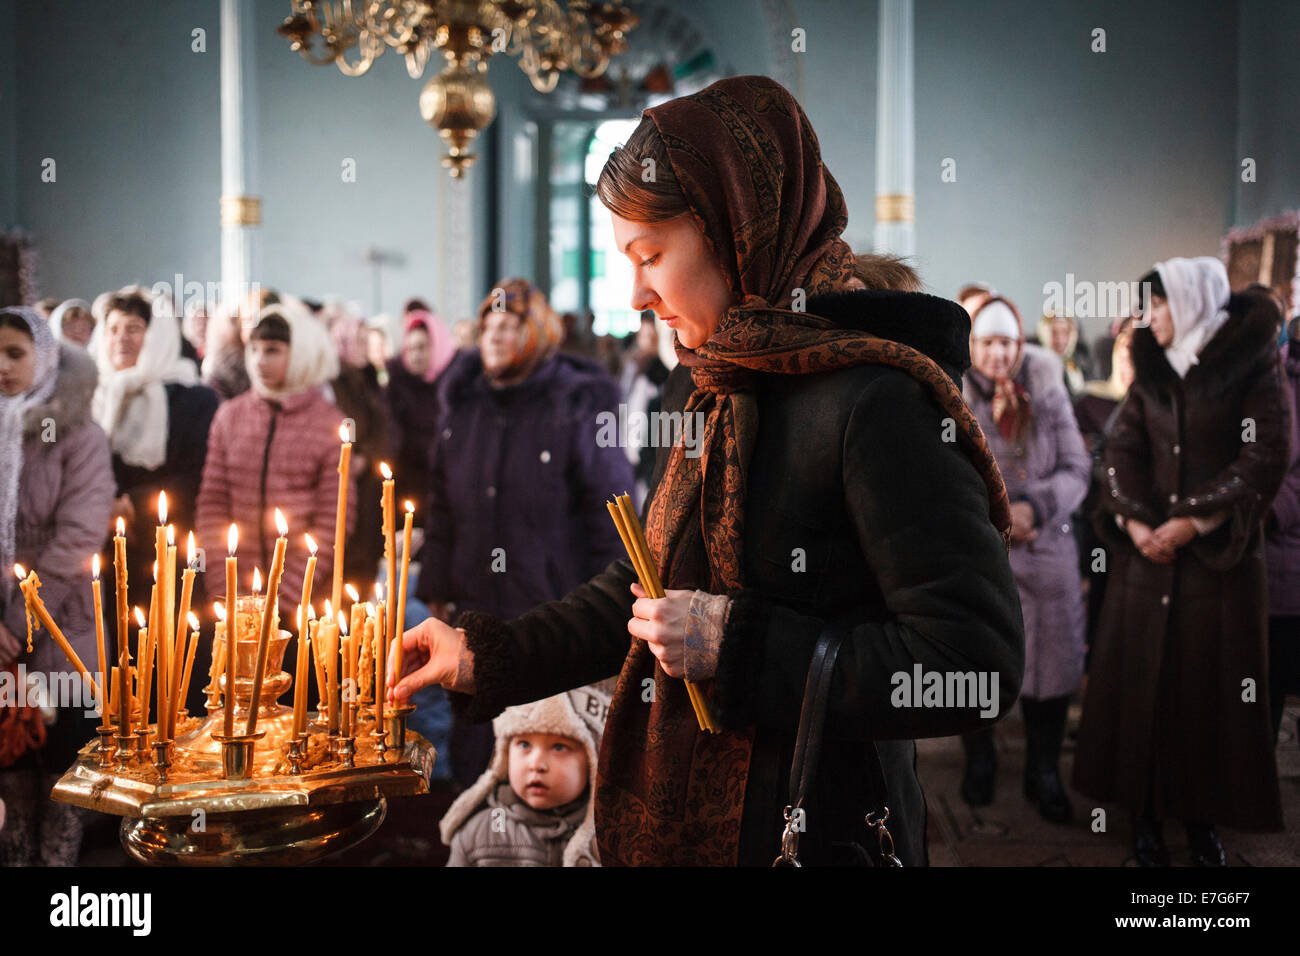 Morning mass during the Feast of Epiphany in the church of the Orthodox Old Believers, Vilkovo, Ukraine Stock Photo